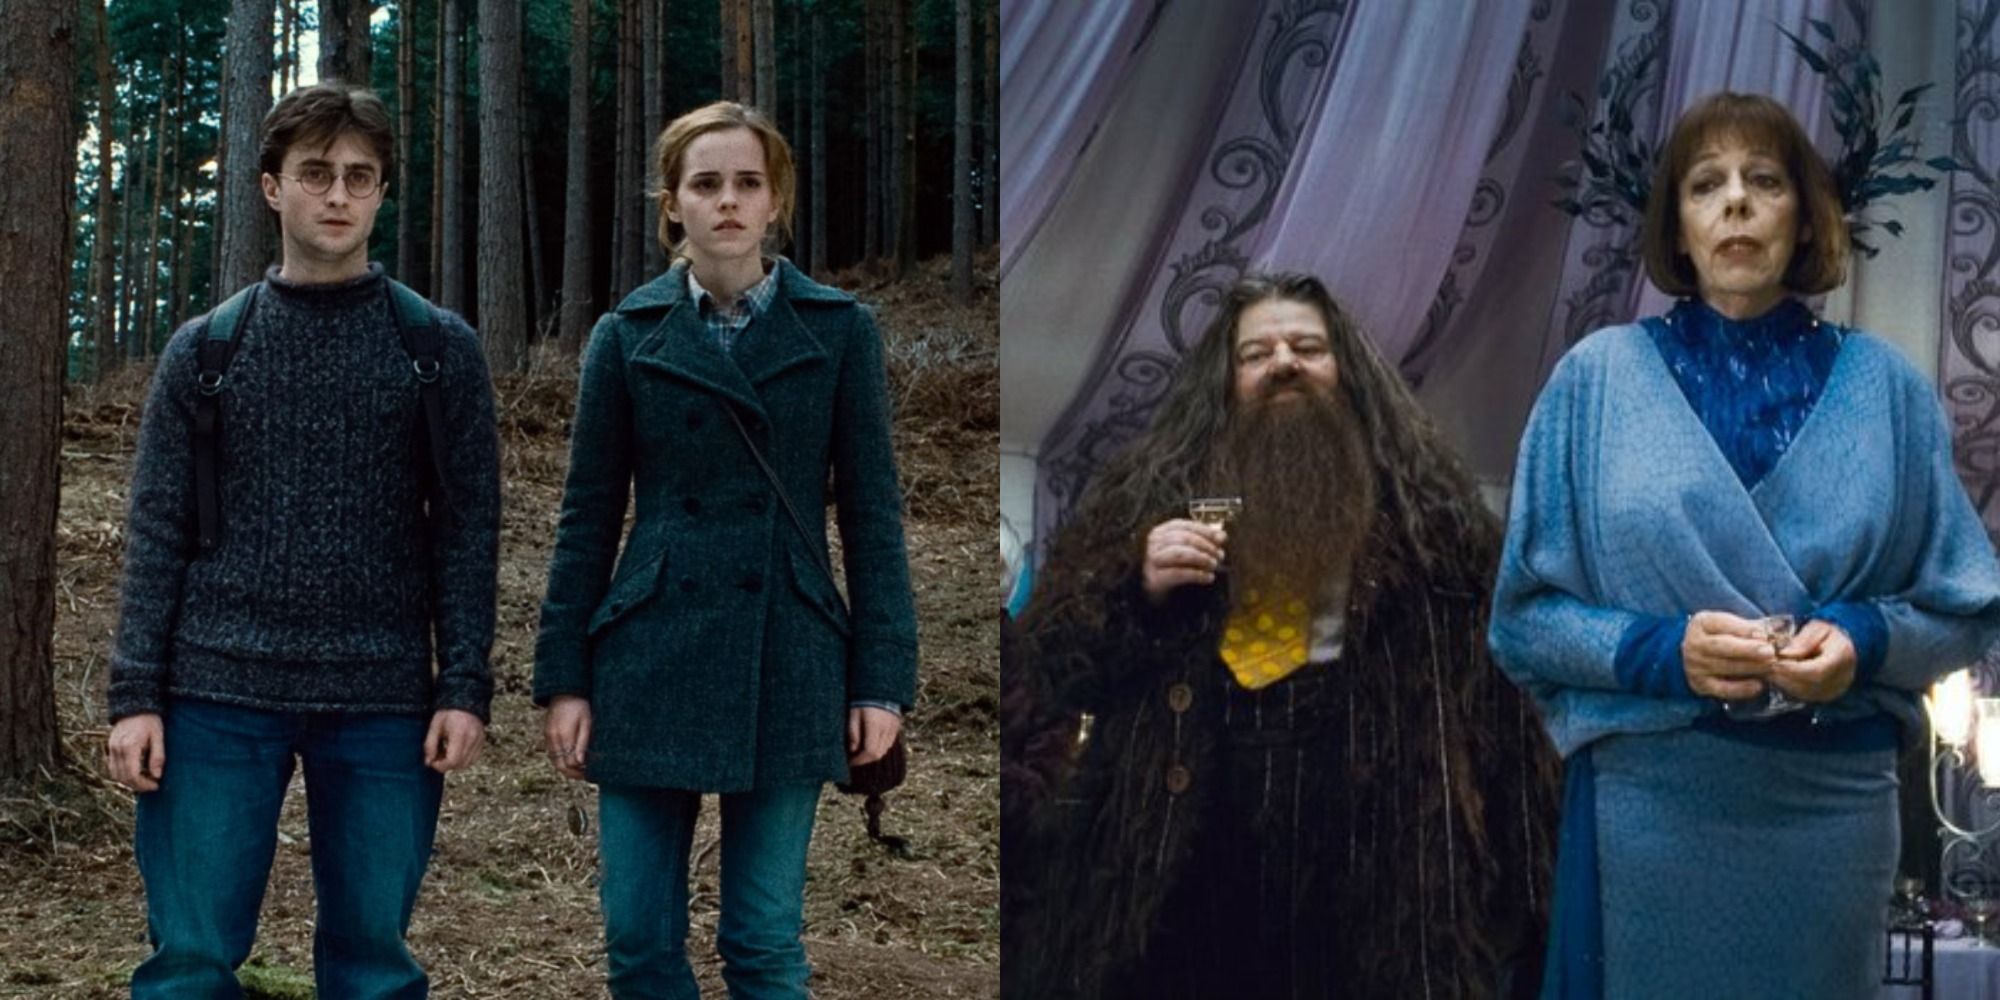 Harry Potter: Harry and Hermione / Hagrid and Madame Maxime